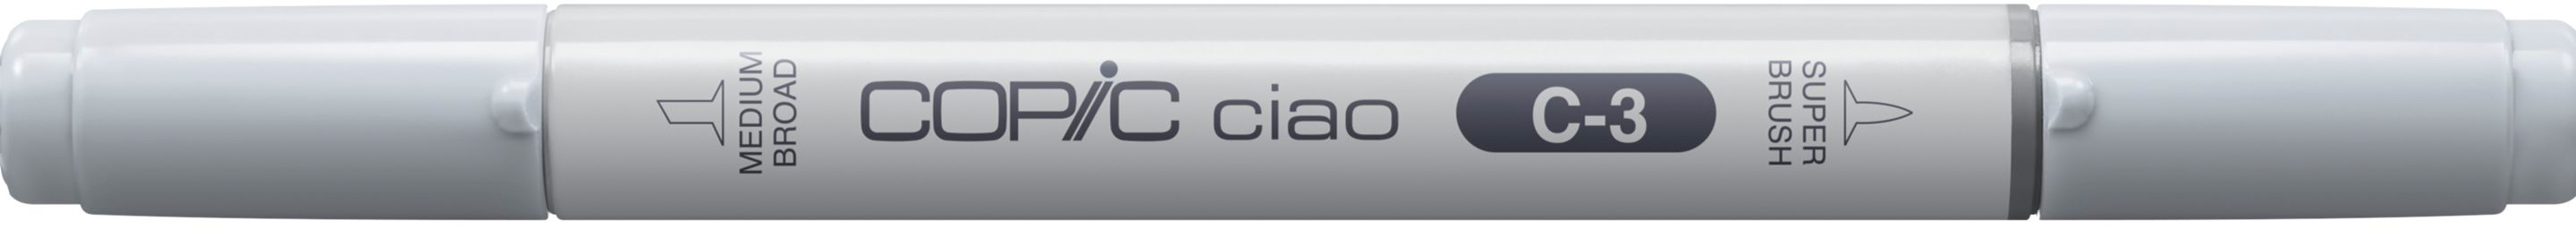 COPIC Marker Ciao 2207513 C-3 - Cool Grey No.3